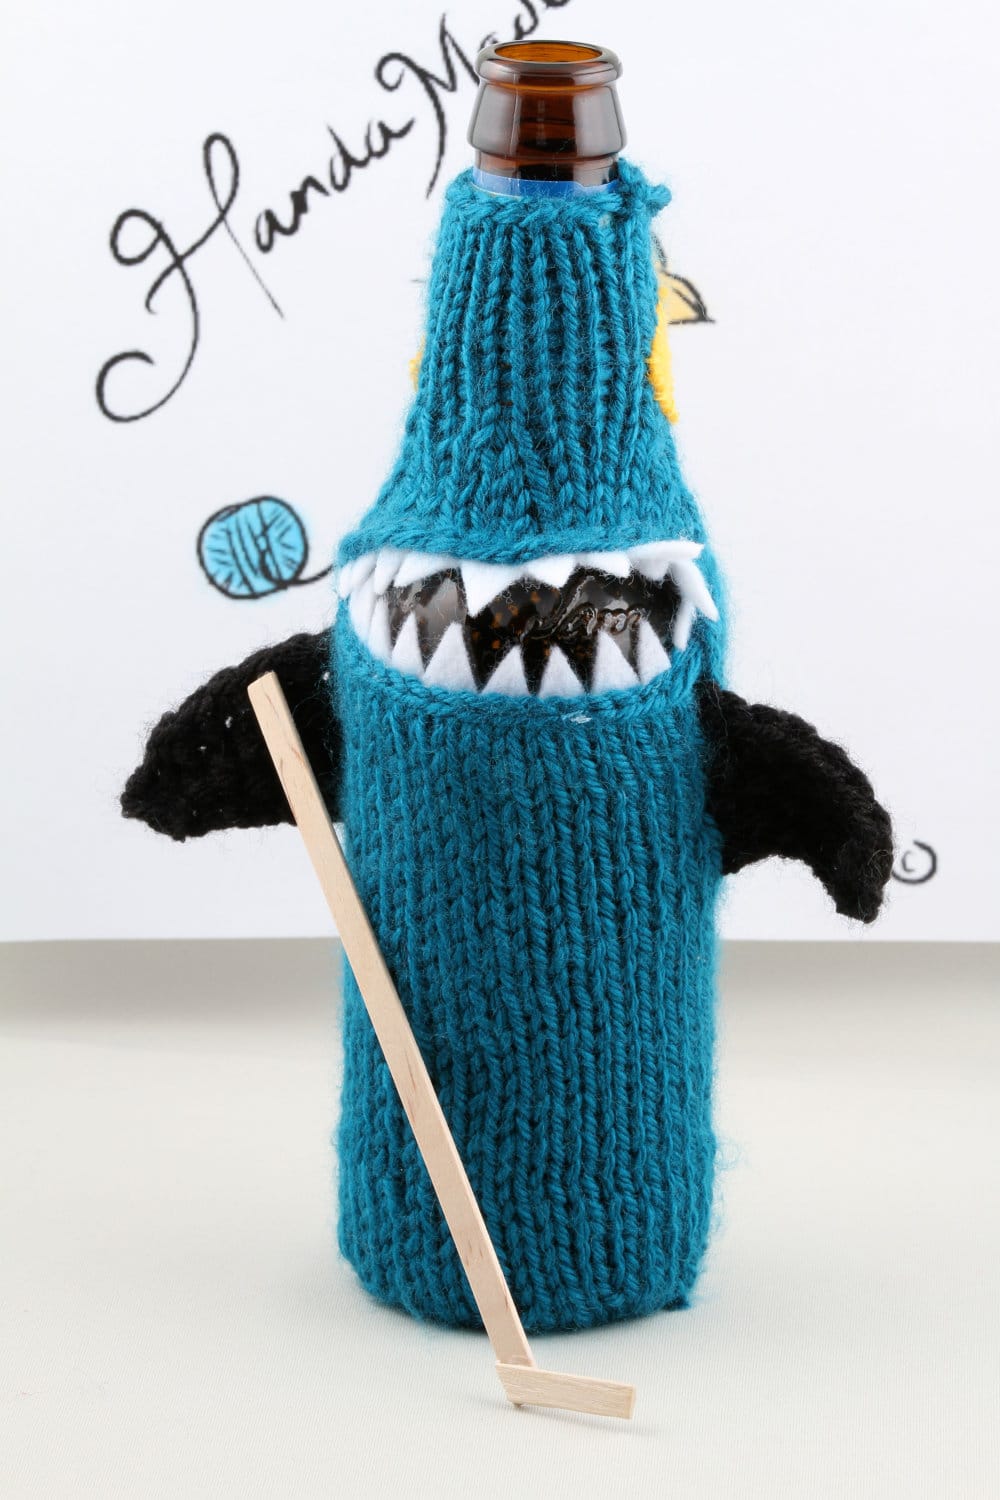 Shark Costume For Your Beer Bottle: The Koozie With Attitude